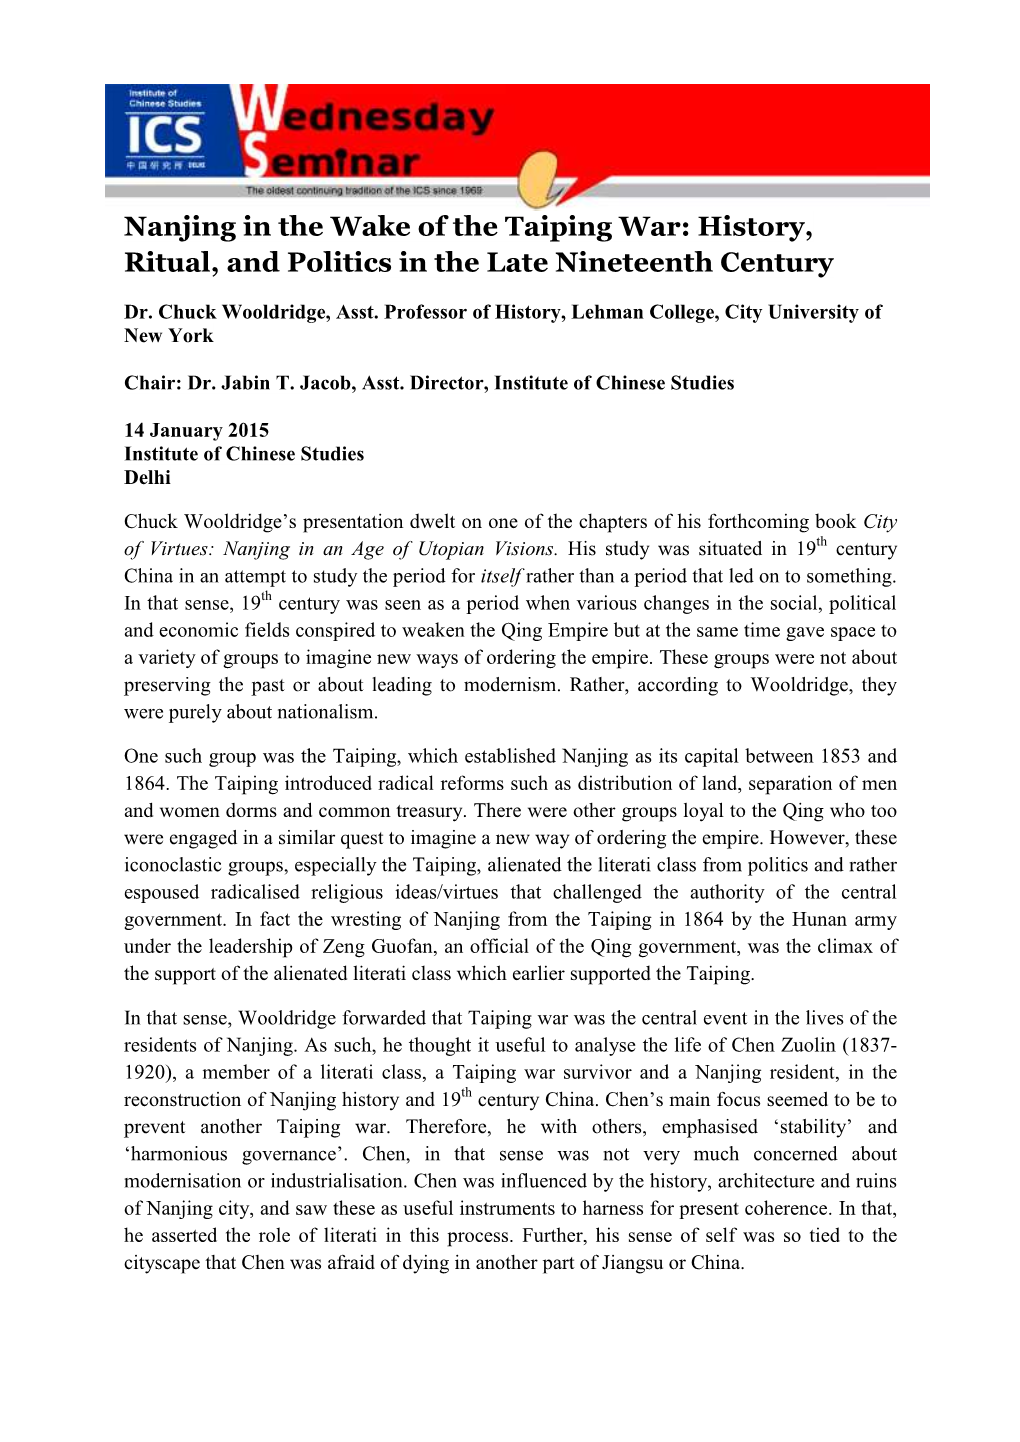 Nanjing in the Wake of the Taiping War: History, Ritual, and Politics in the Late Nineteenth Century